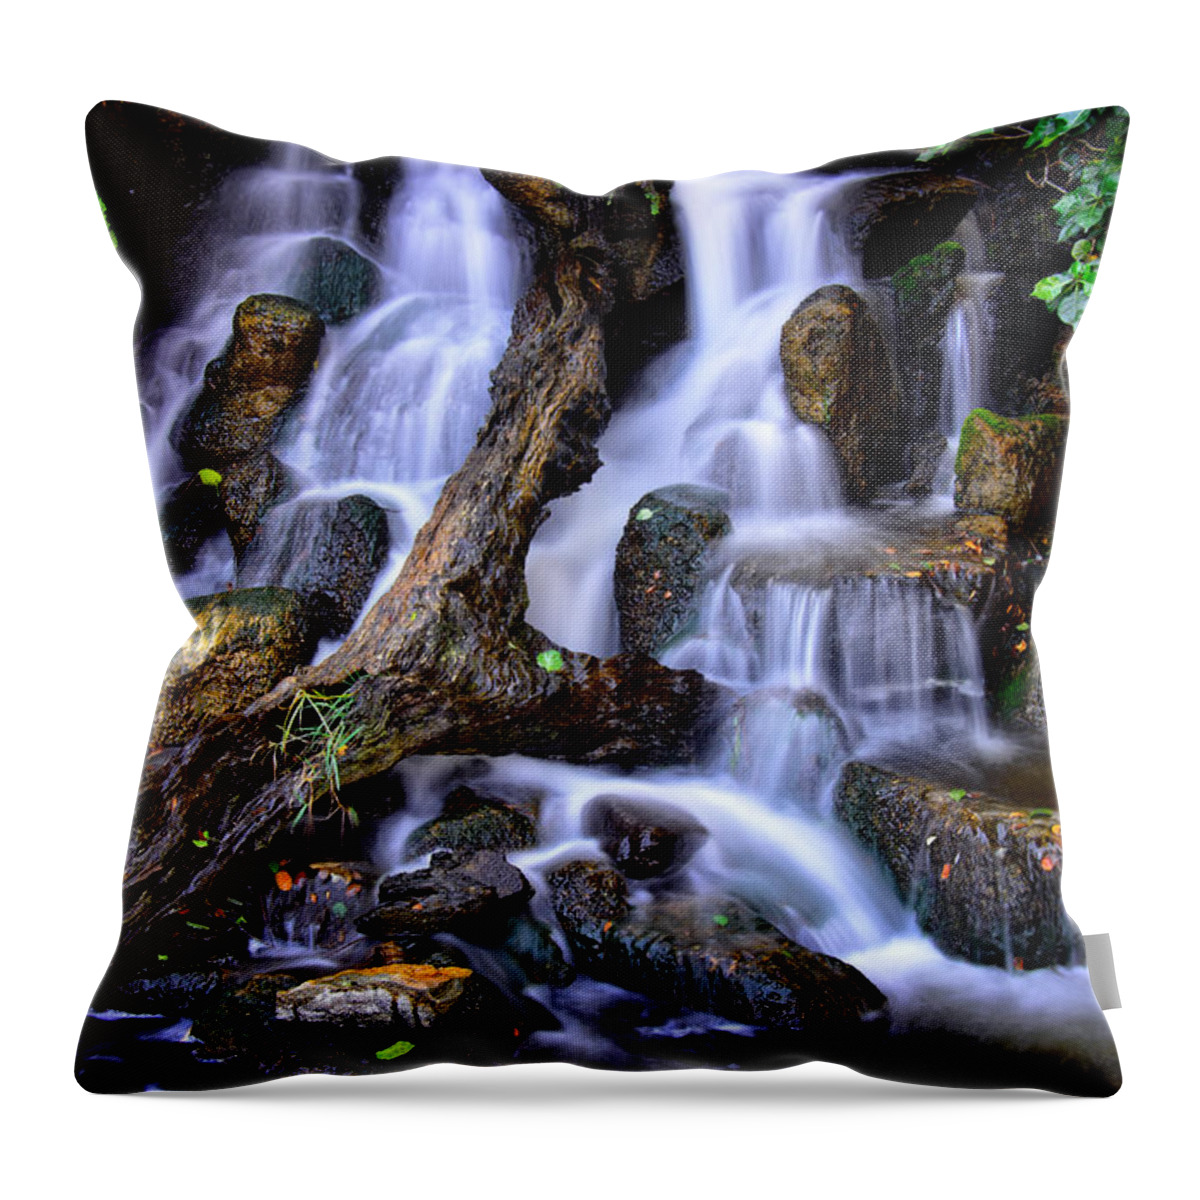 Waterfall Throw Pillow featuring the photograph Cascades by Harry Spitz